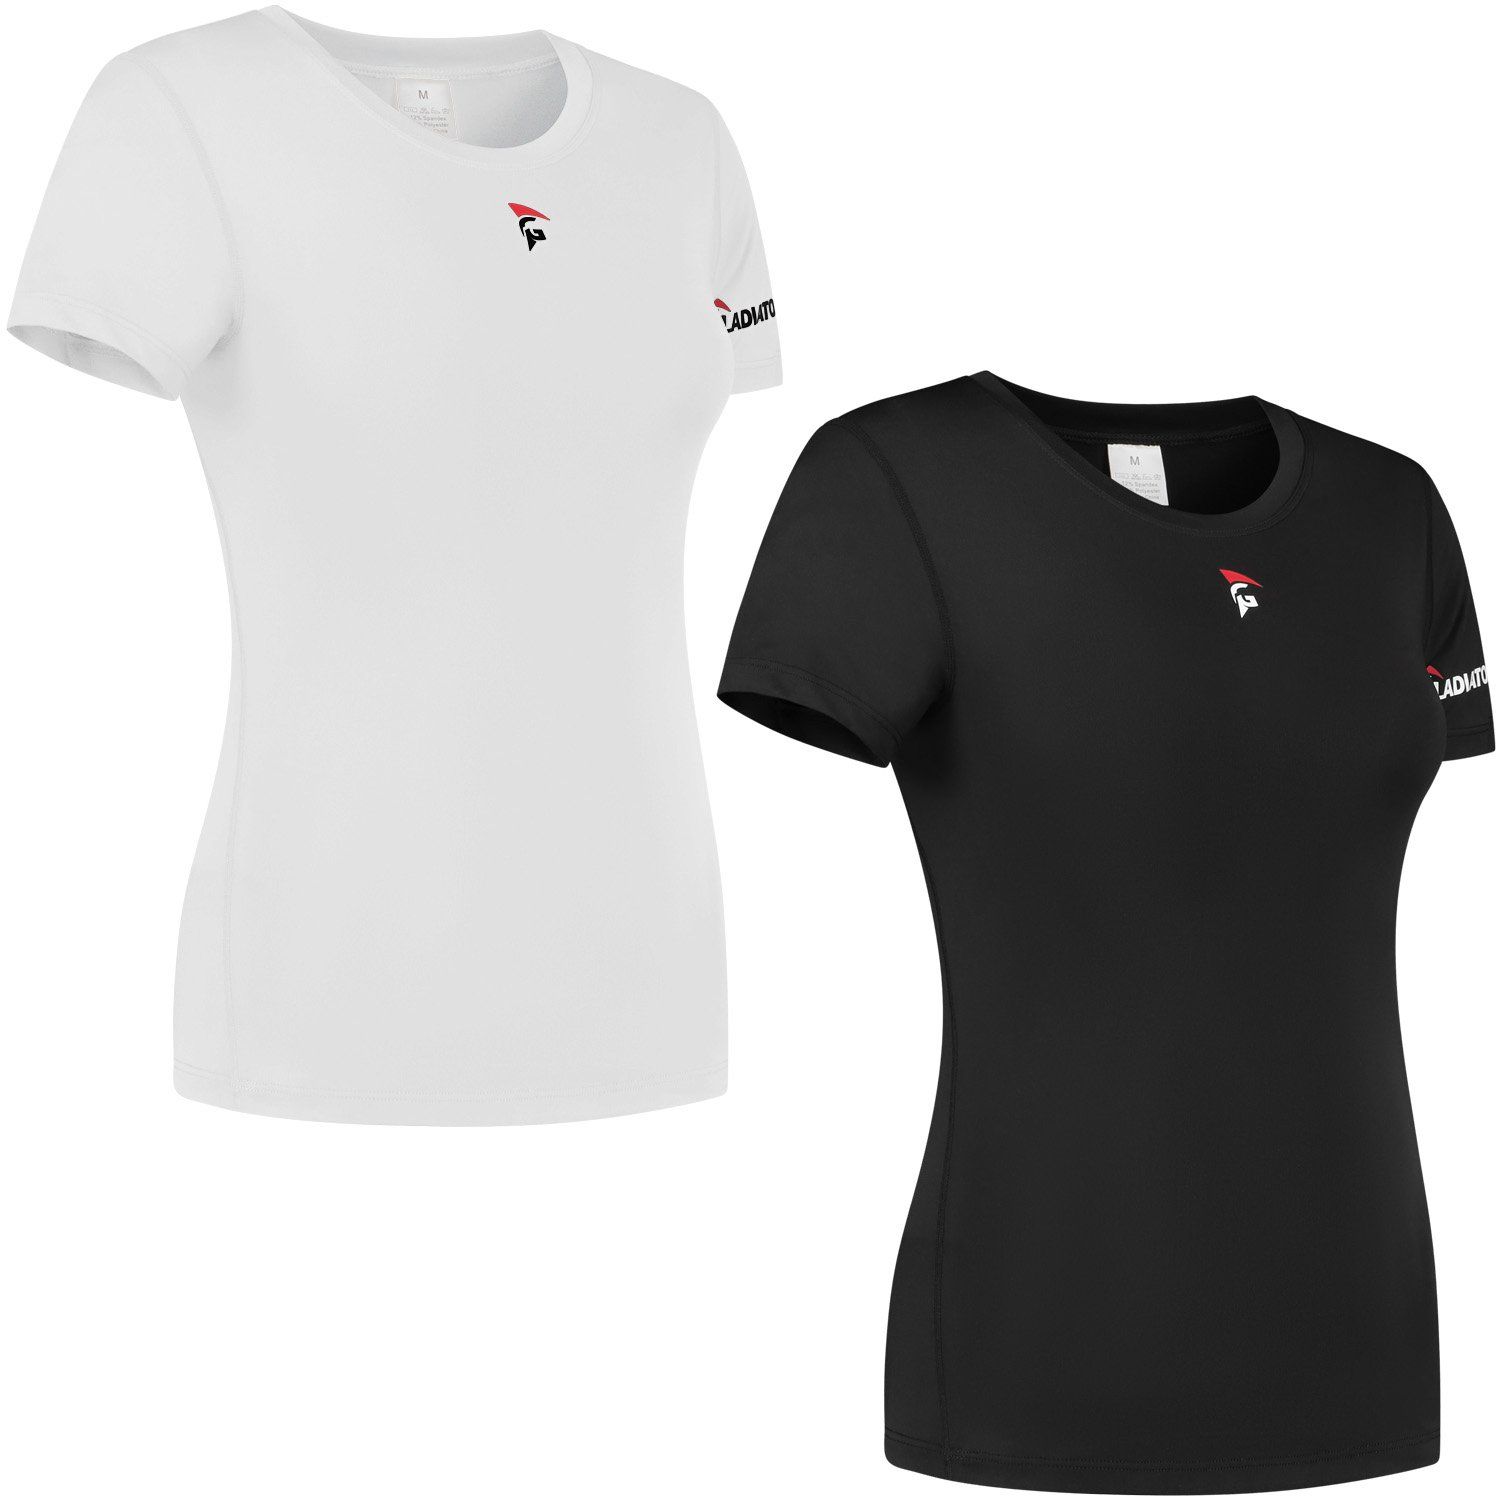 gladiator sports compression shirt for women in black and white